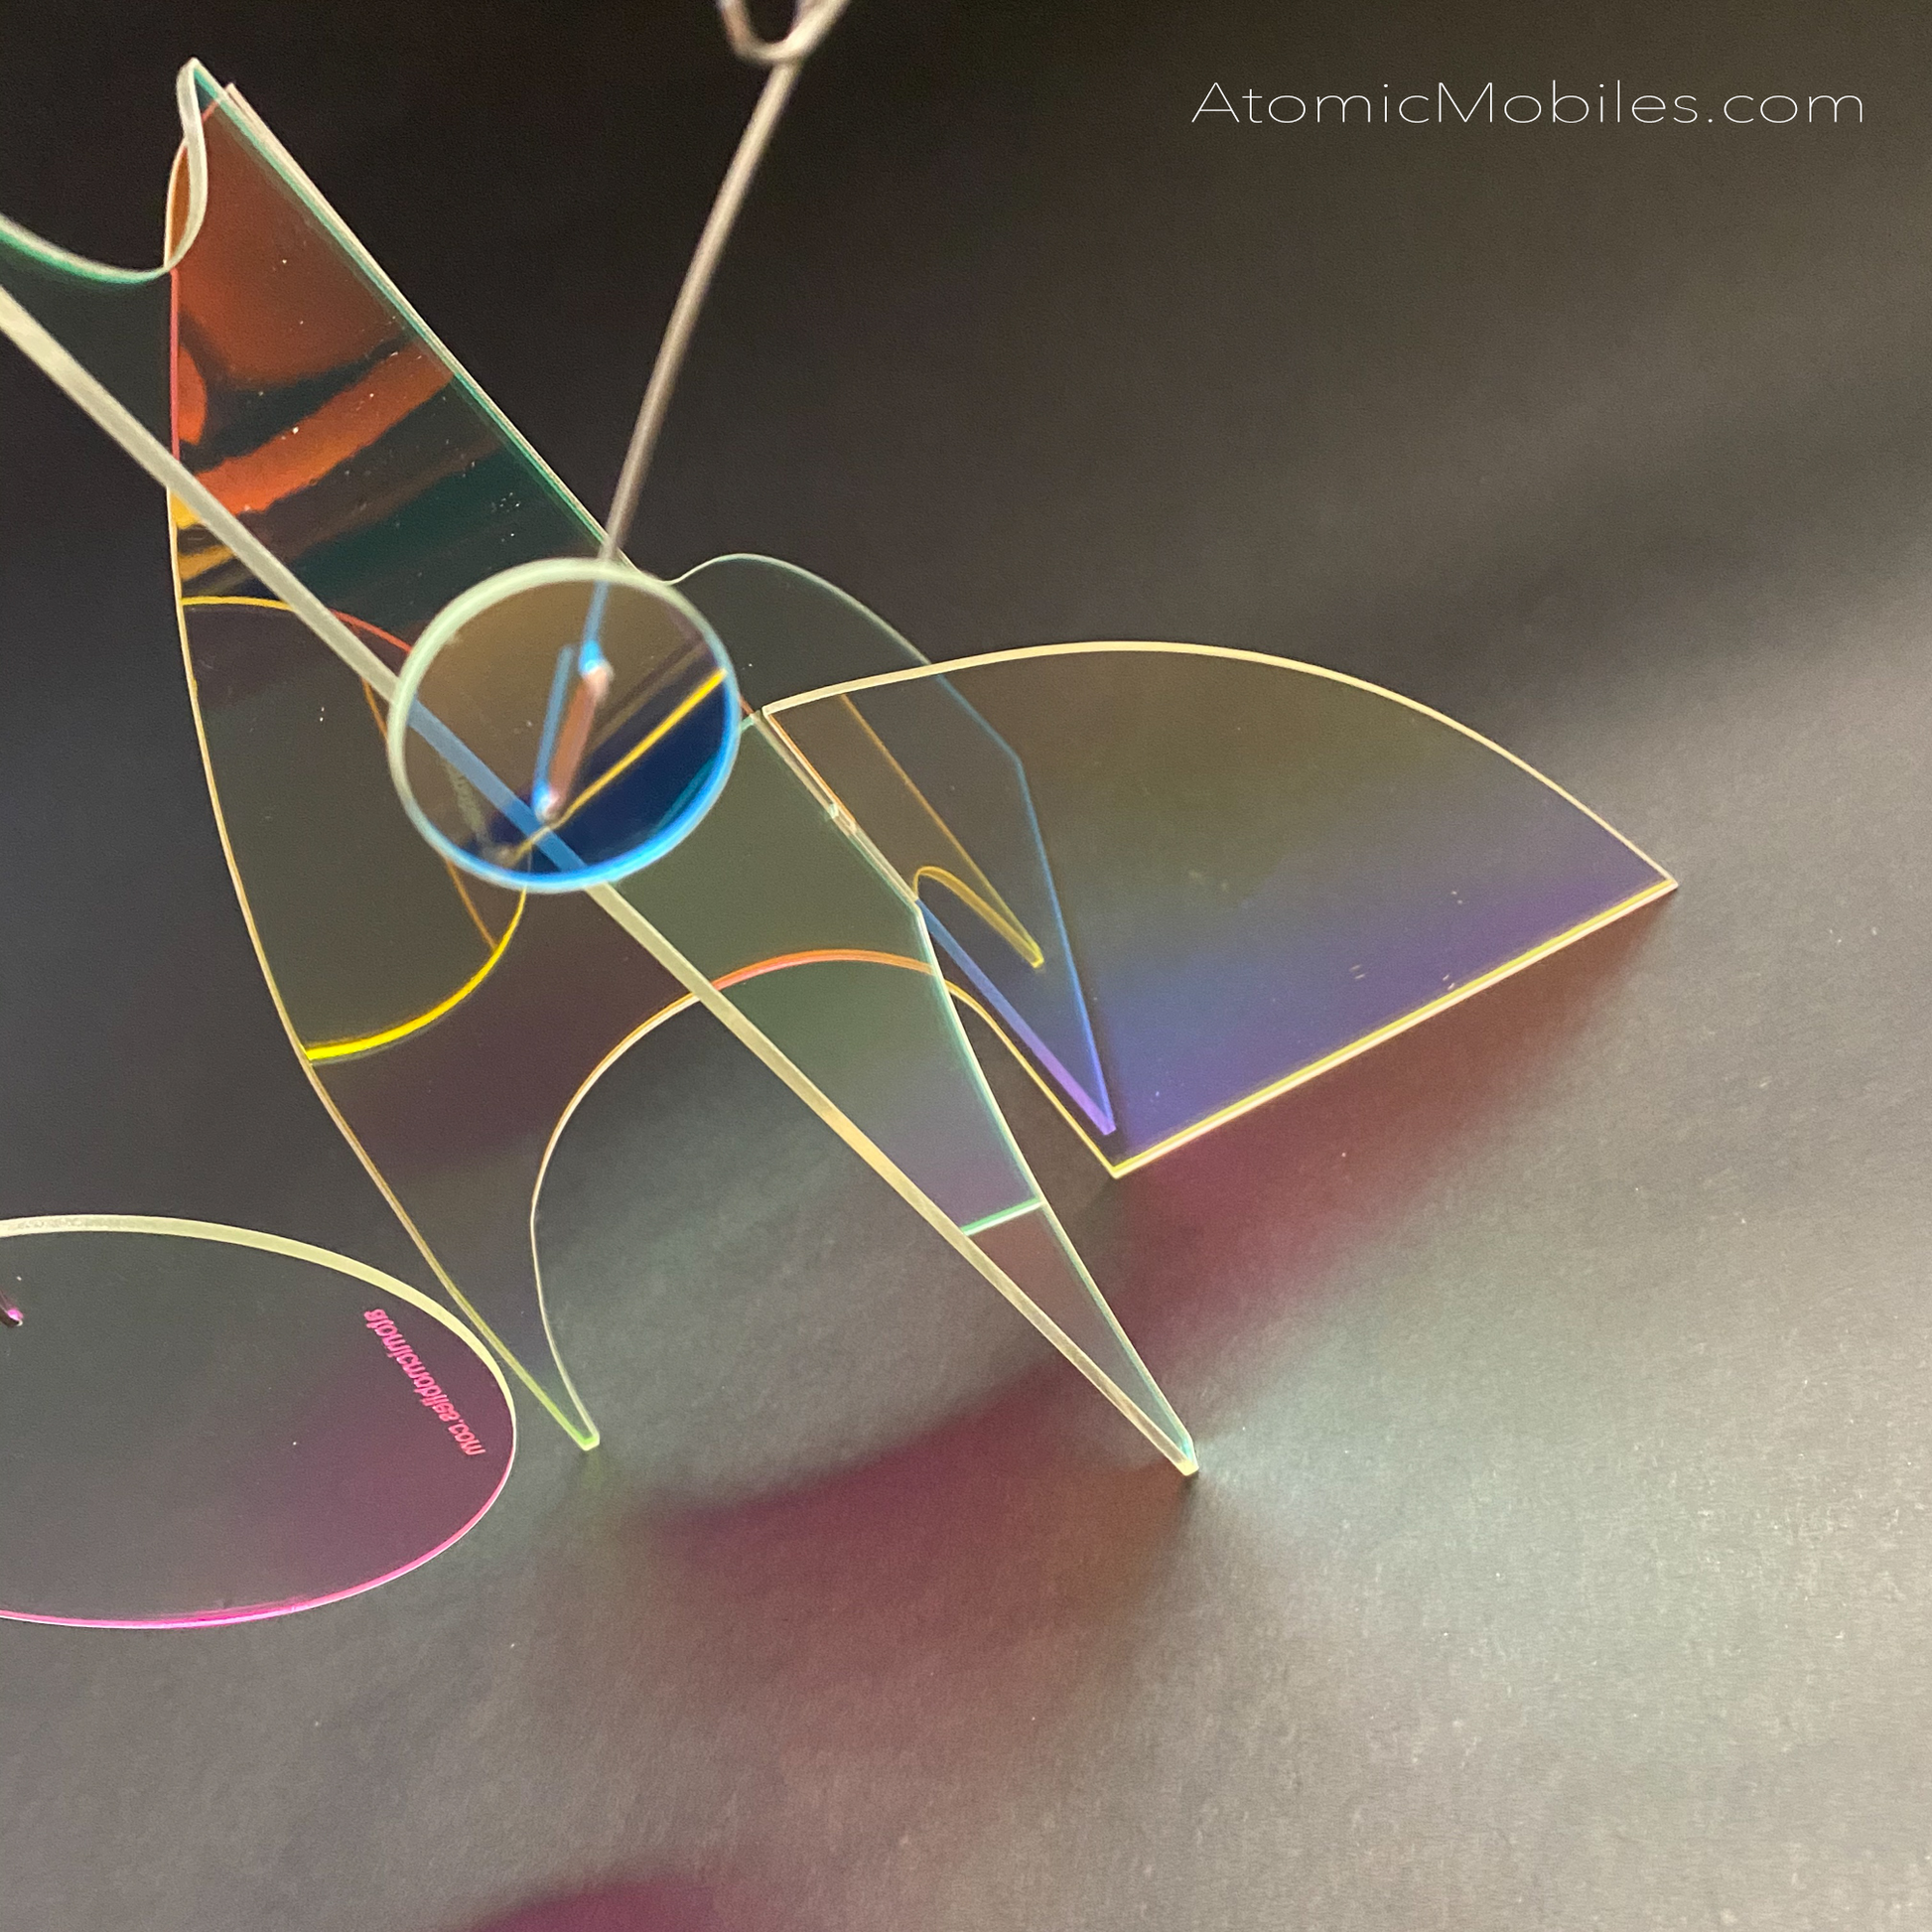 close up of fascinating prism iridescent modern art stabile sculpture by AtomicMobiles.com